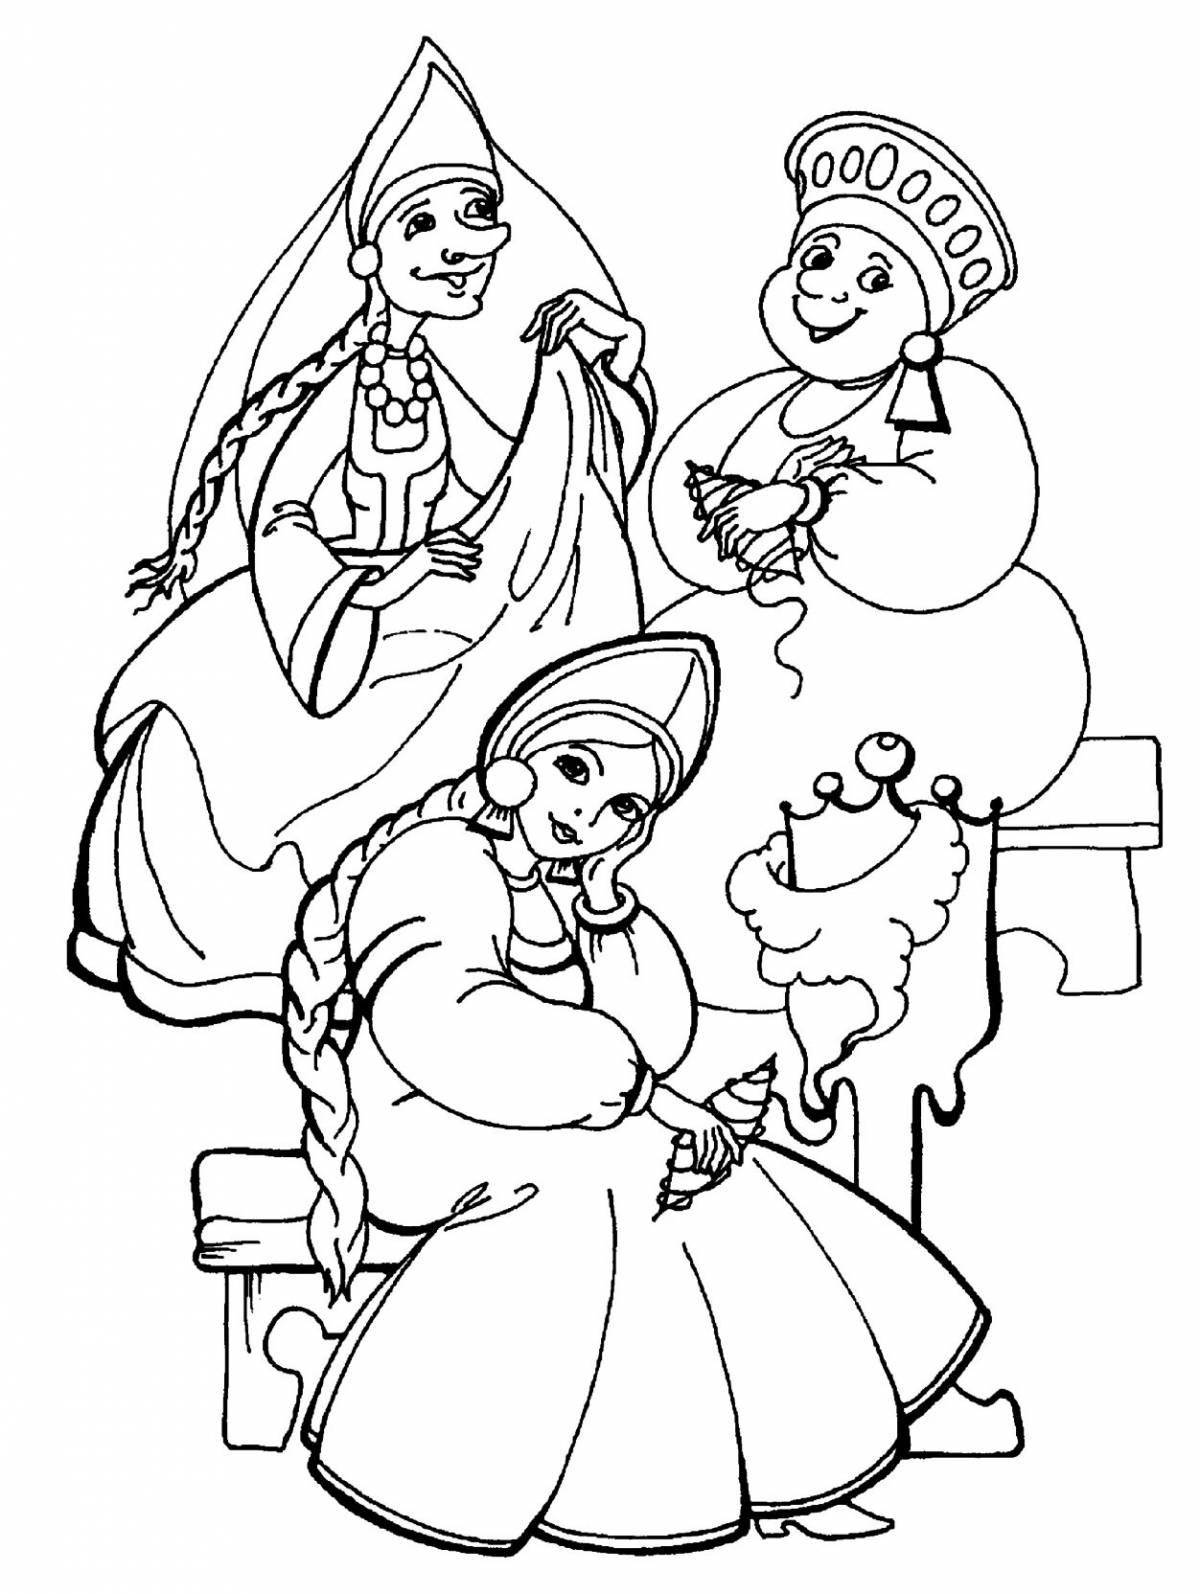 Fascinating coloring book for children 3-4 years old based on Pushkin's fairy tales